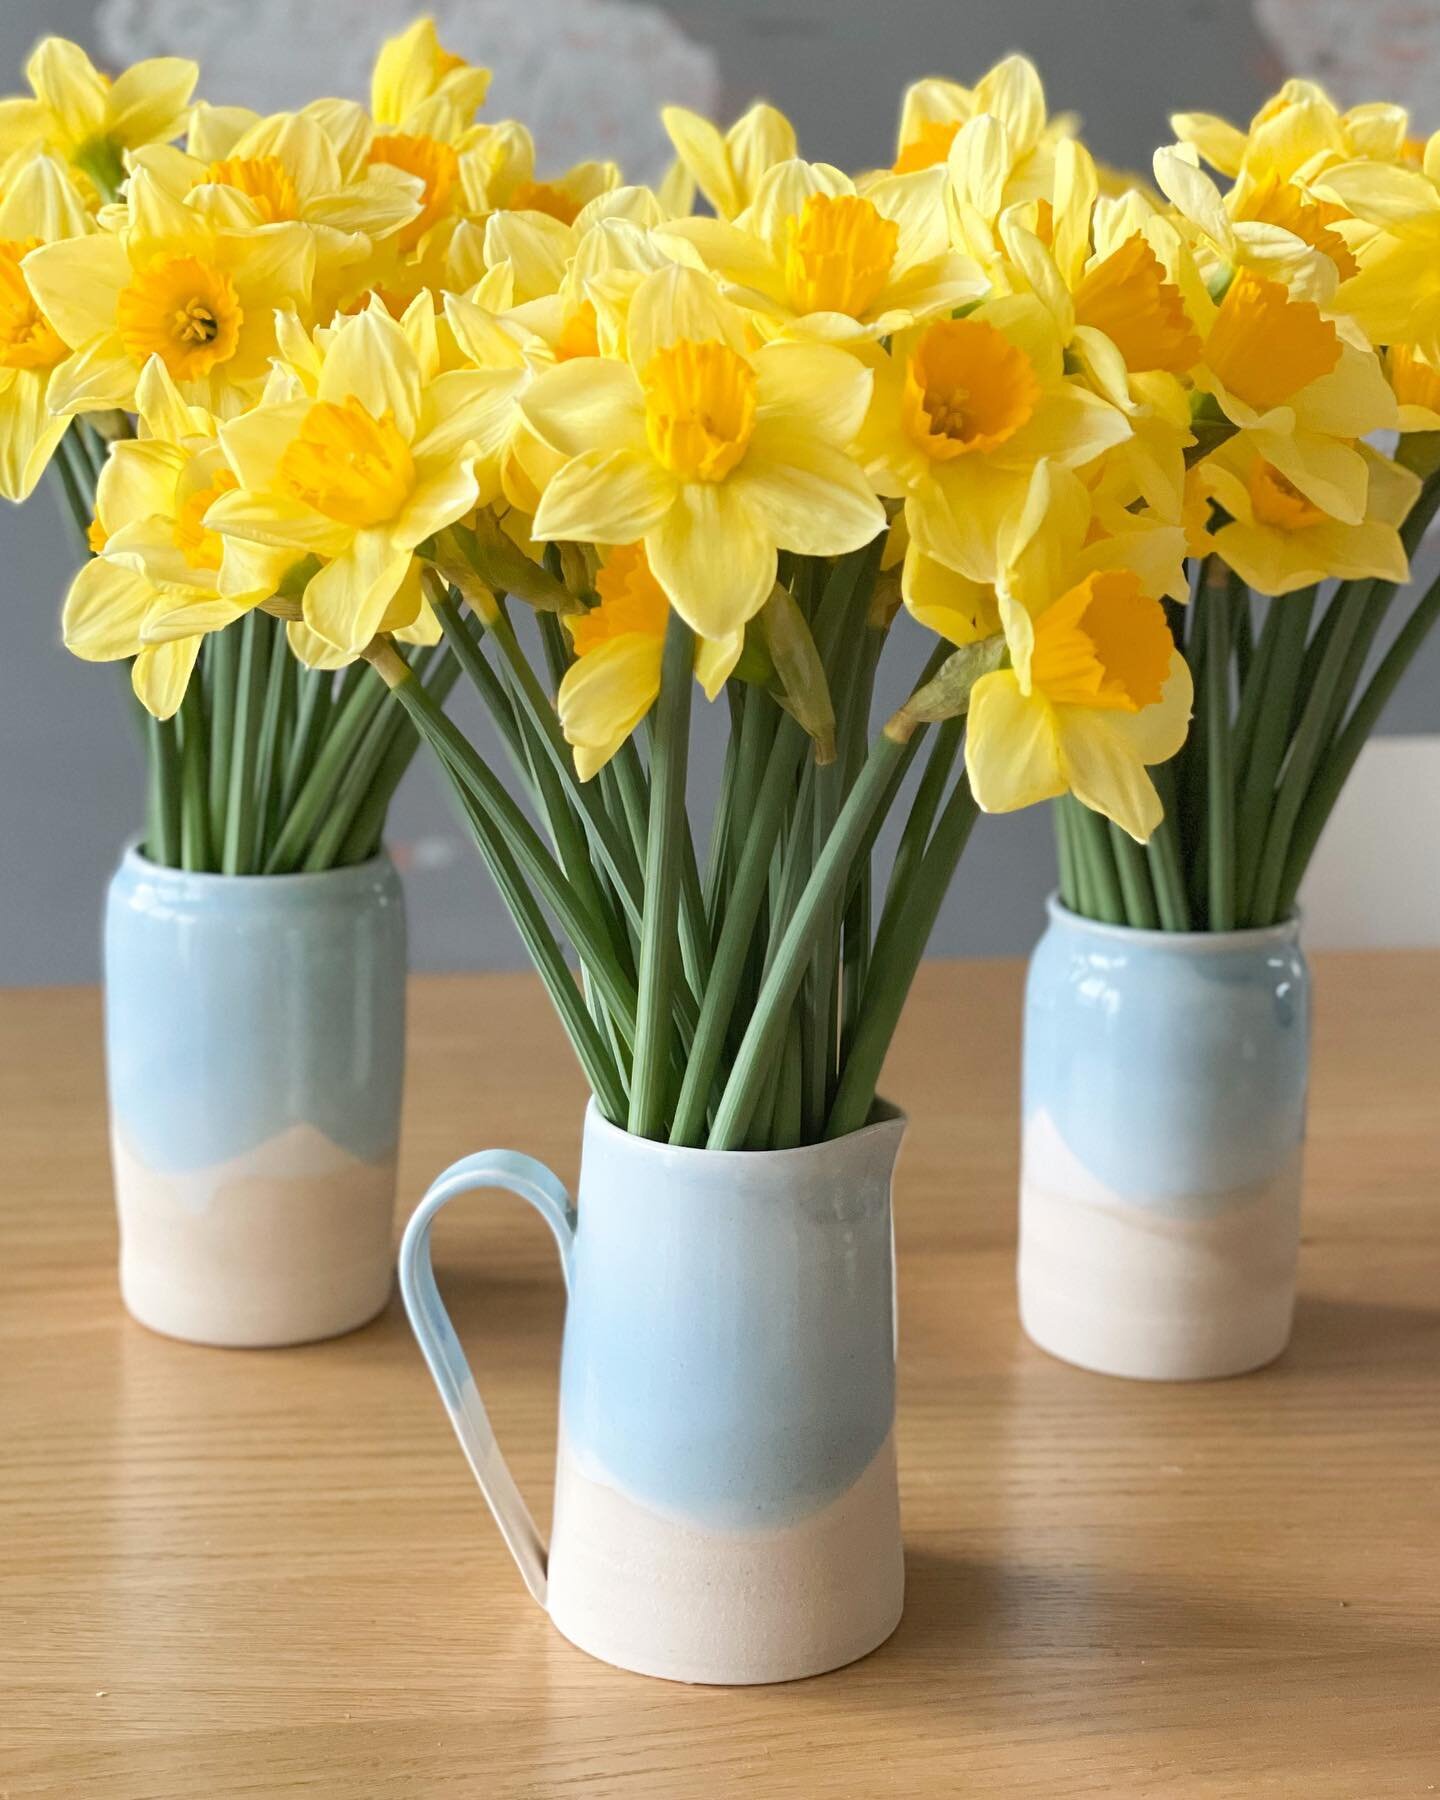 Daffodils in full bloom 💛

Only brought yesterday 🙄

#handmade #ceramics #constantinebay #cornwall #pottery #stoneware #wheelthrownpottery #satisifying #shoplocal #shopsmall #padstow #newquaylife #photography